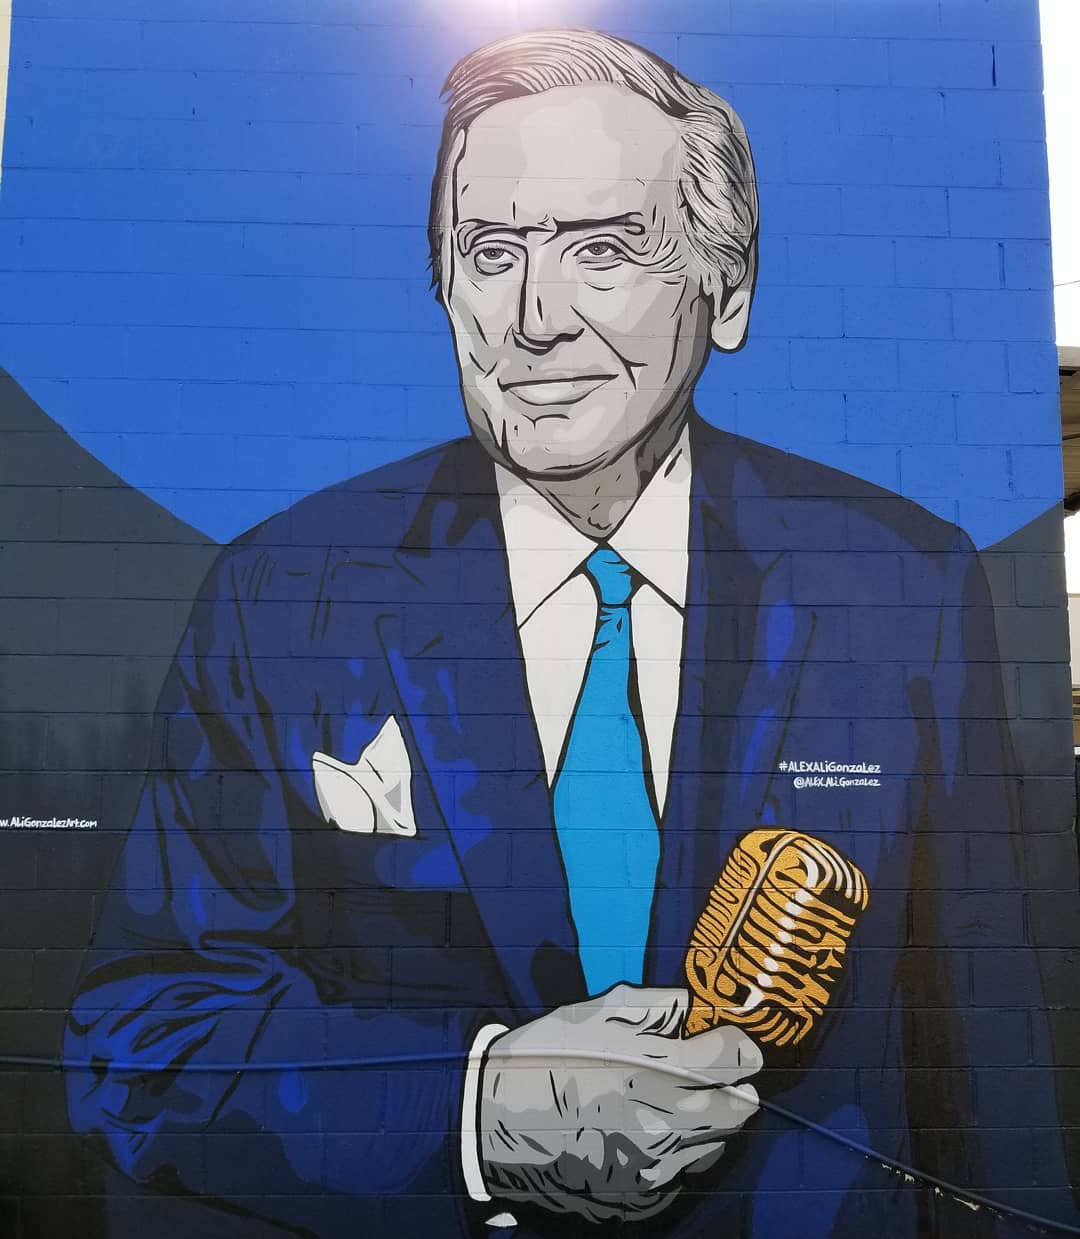 mural in Glendale by artist Alex Gonzalez. Tagged: sports, Vin Scully